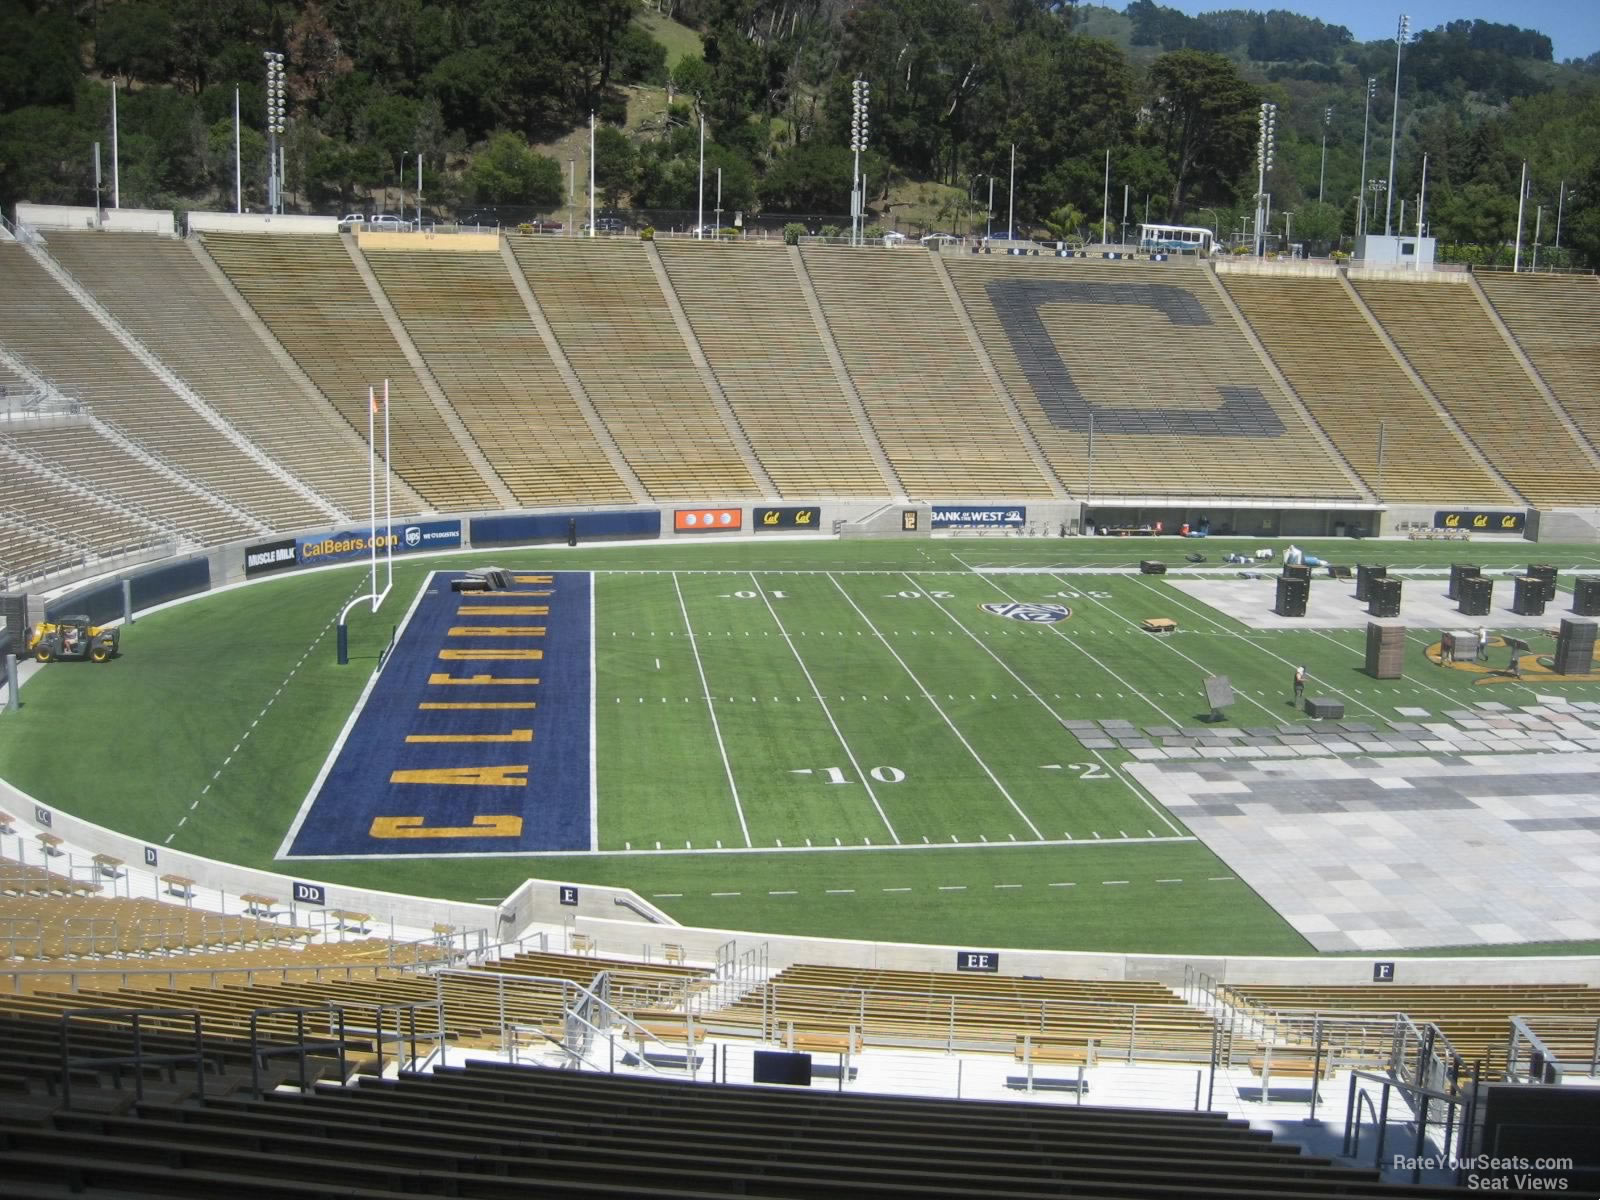 section ee, row 46 seat view  - memorial stadium (cal)